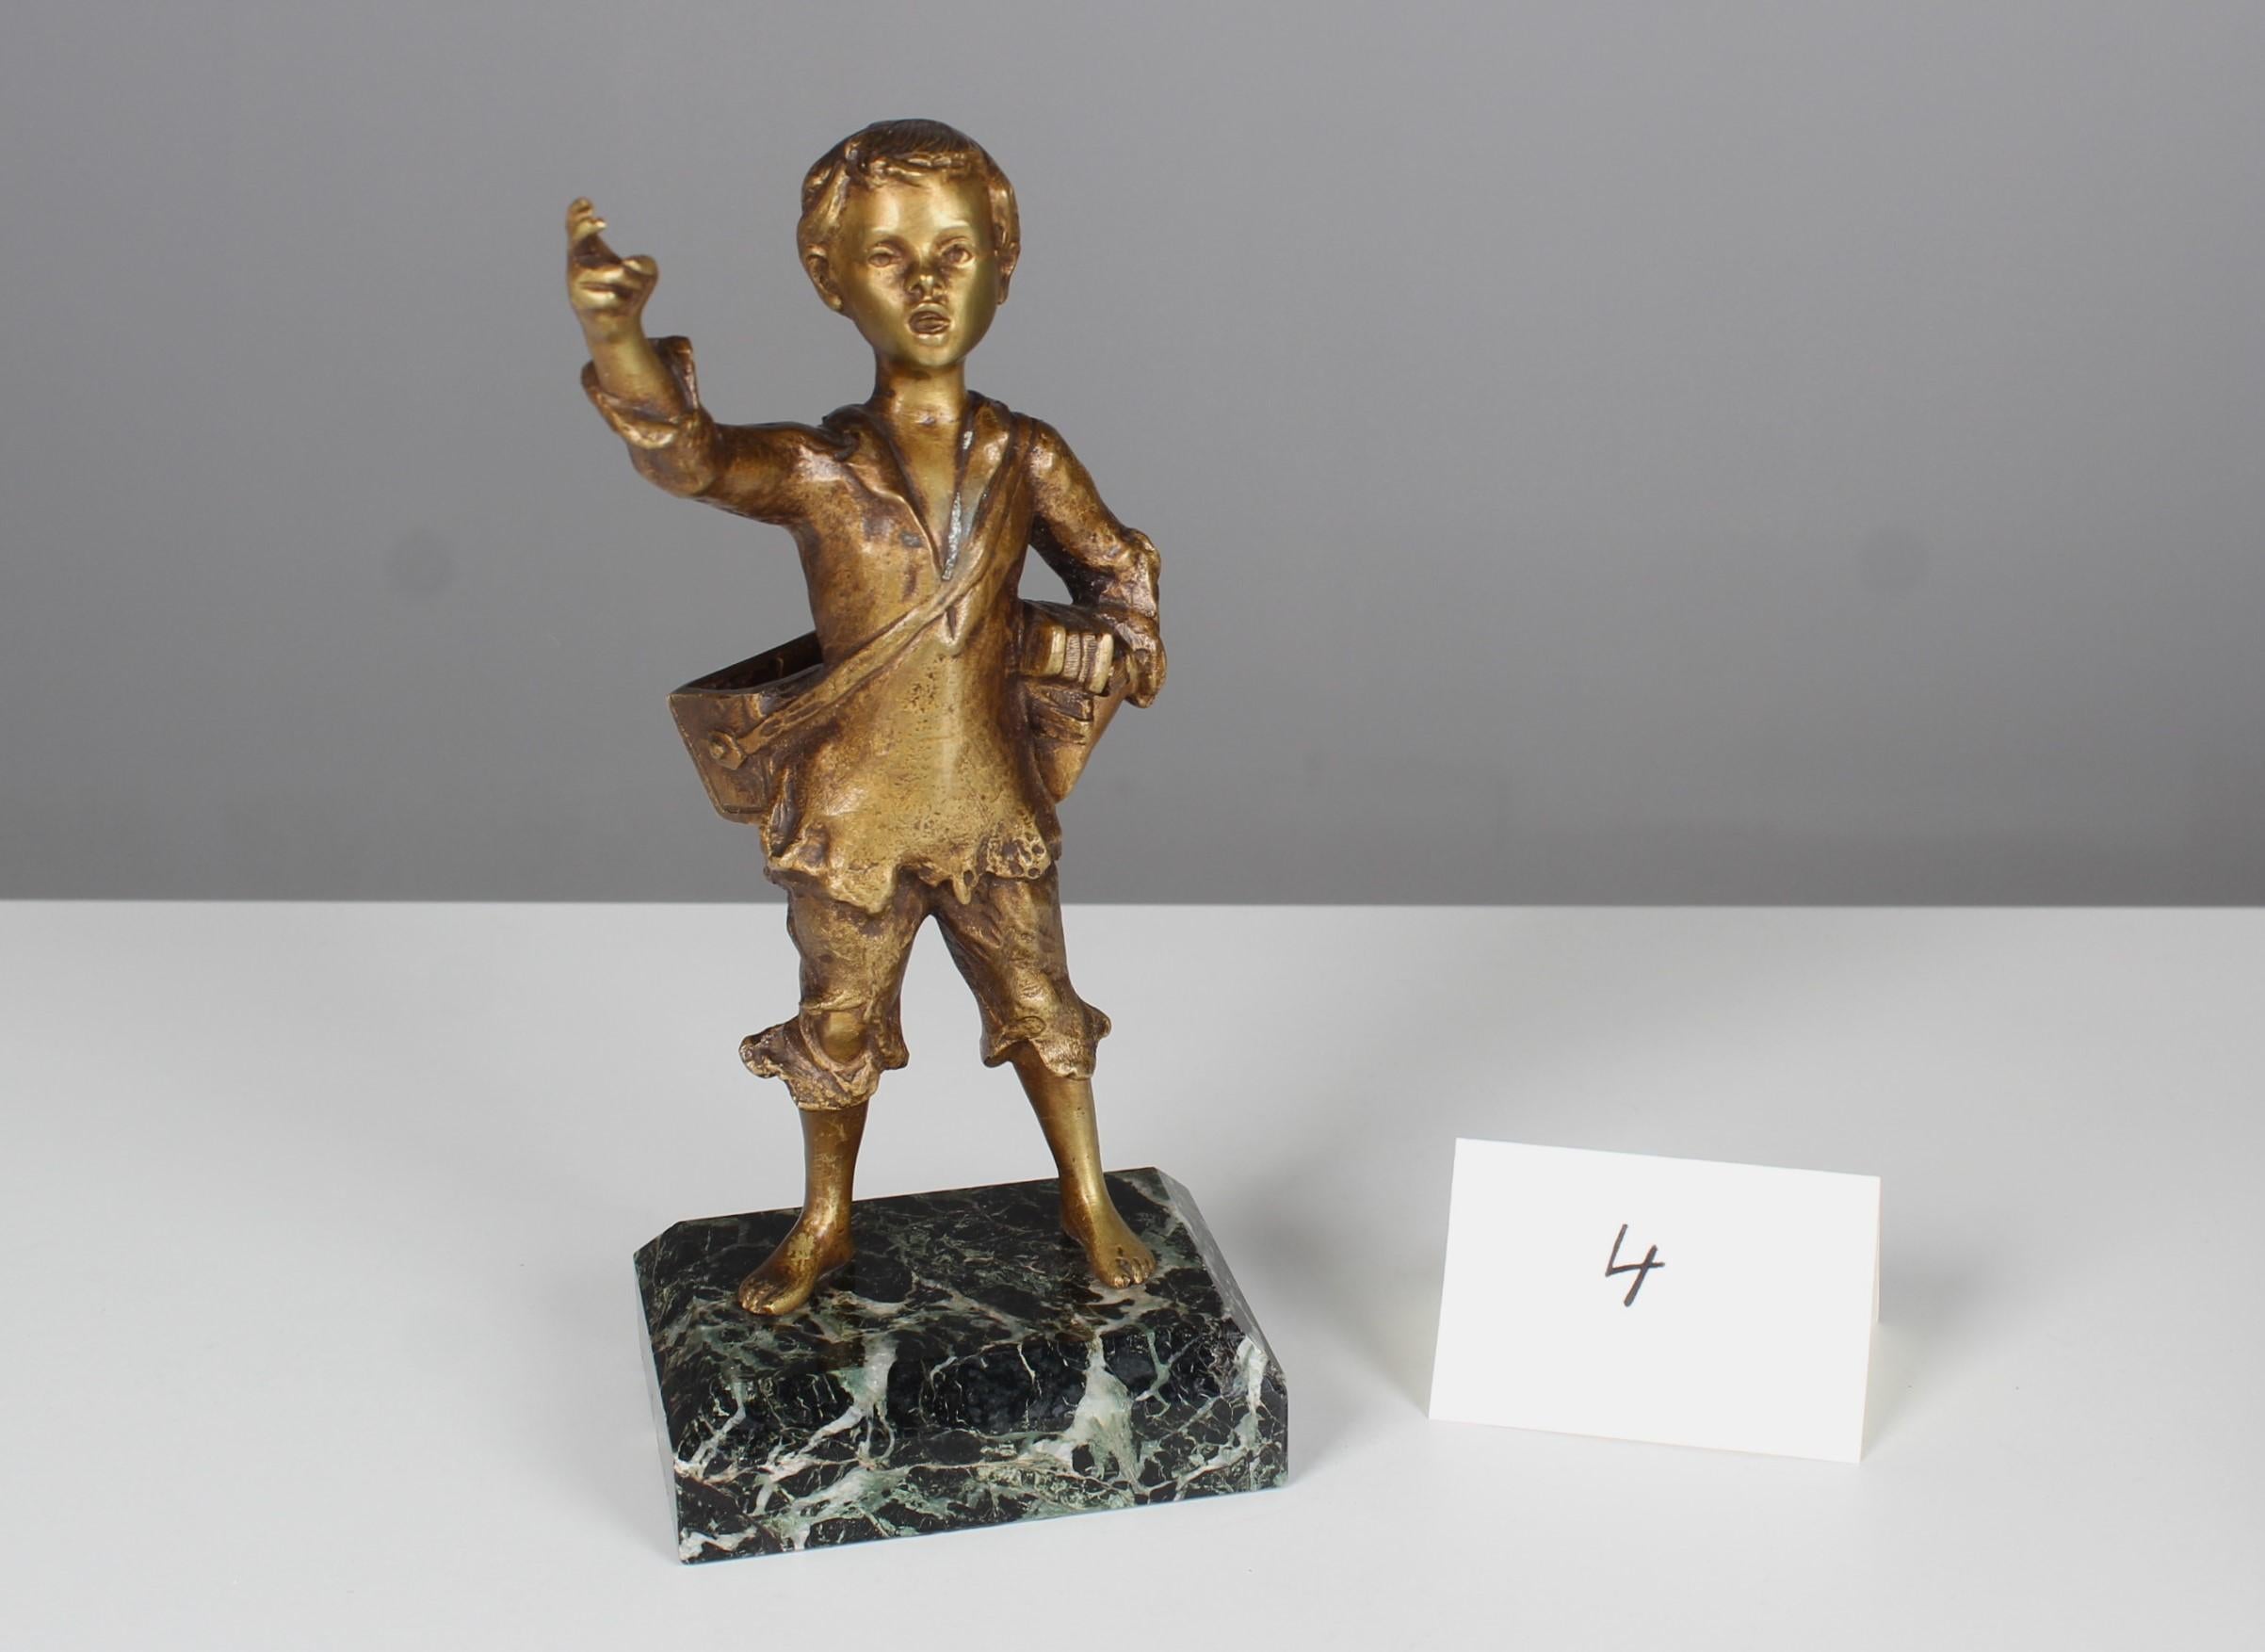 Antique bronze sculpture on a marble base by the french sculptor Henri Godet (born in Paris March, 5th 1863 - Vincennes 1937).
Depiction of a young shoe shiner boy, 